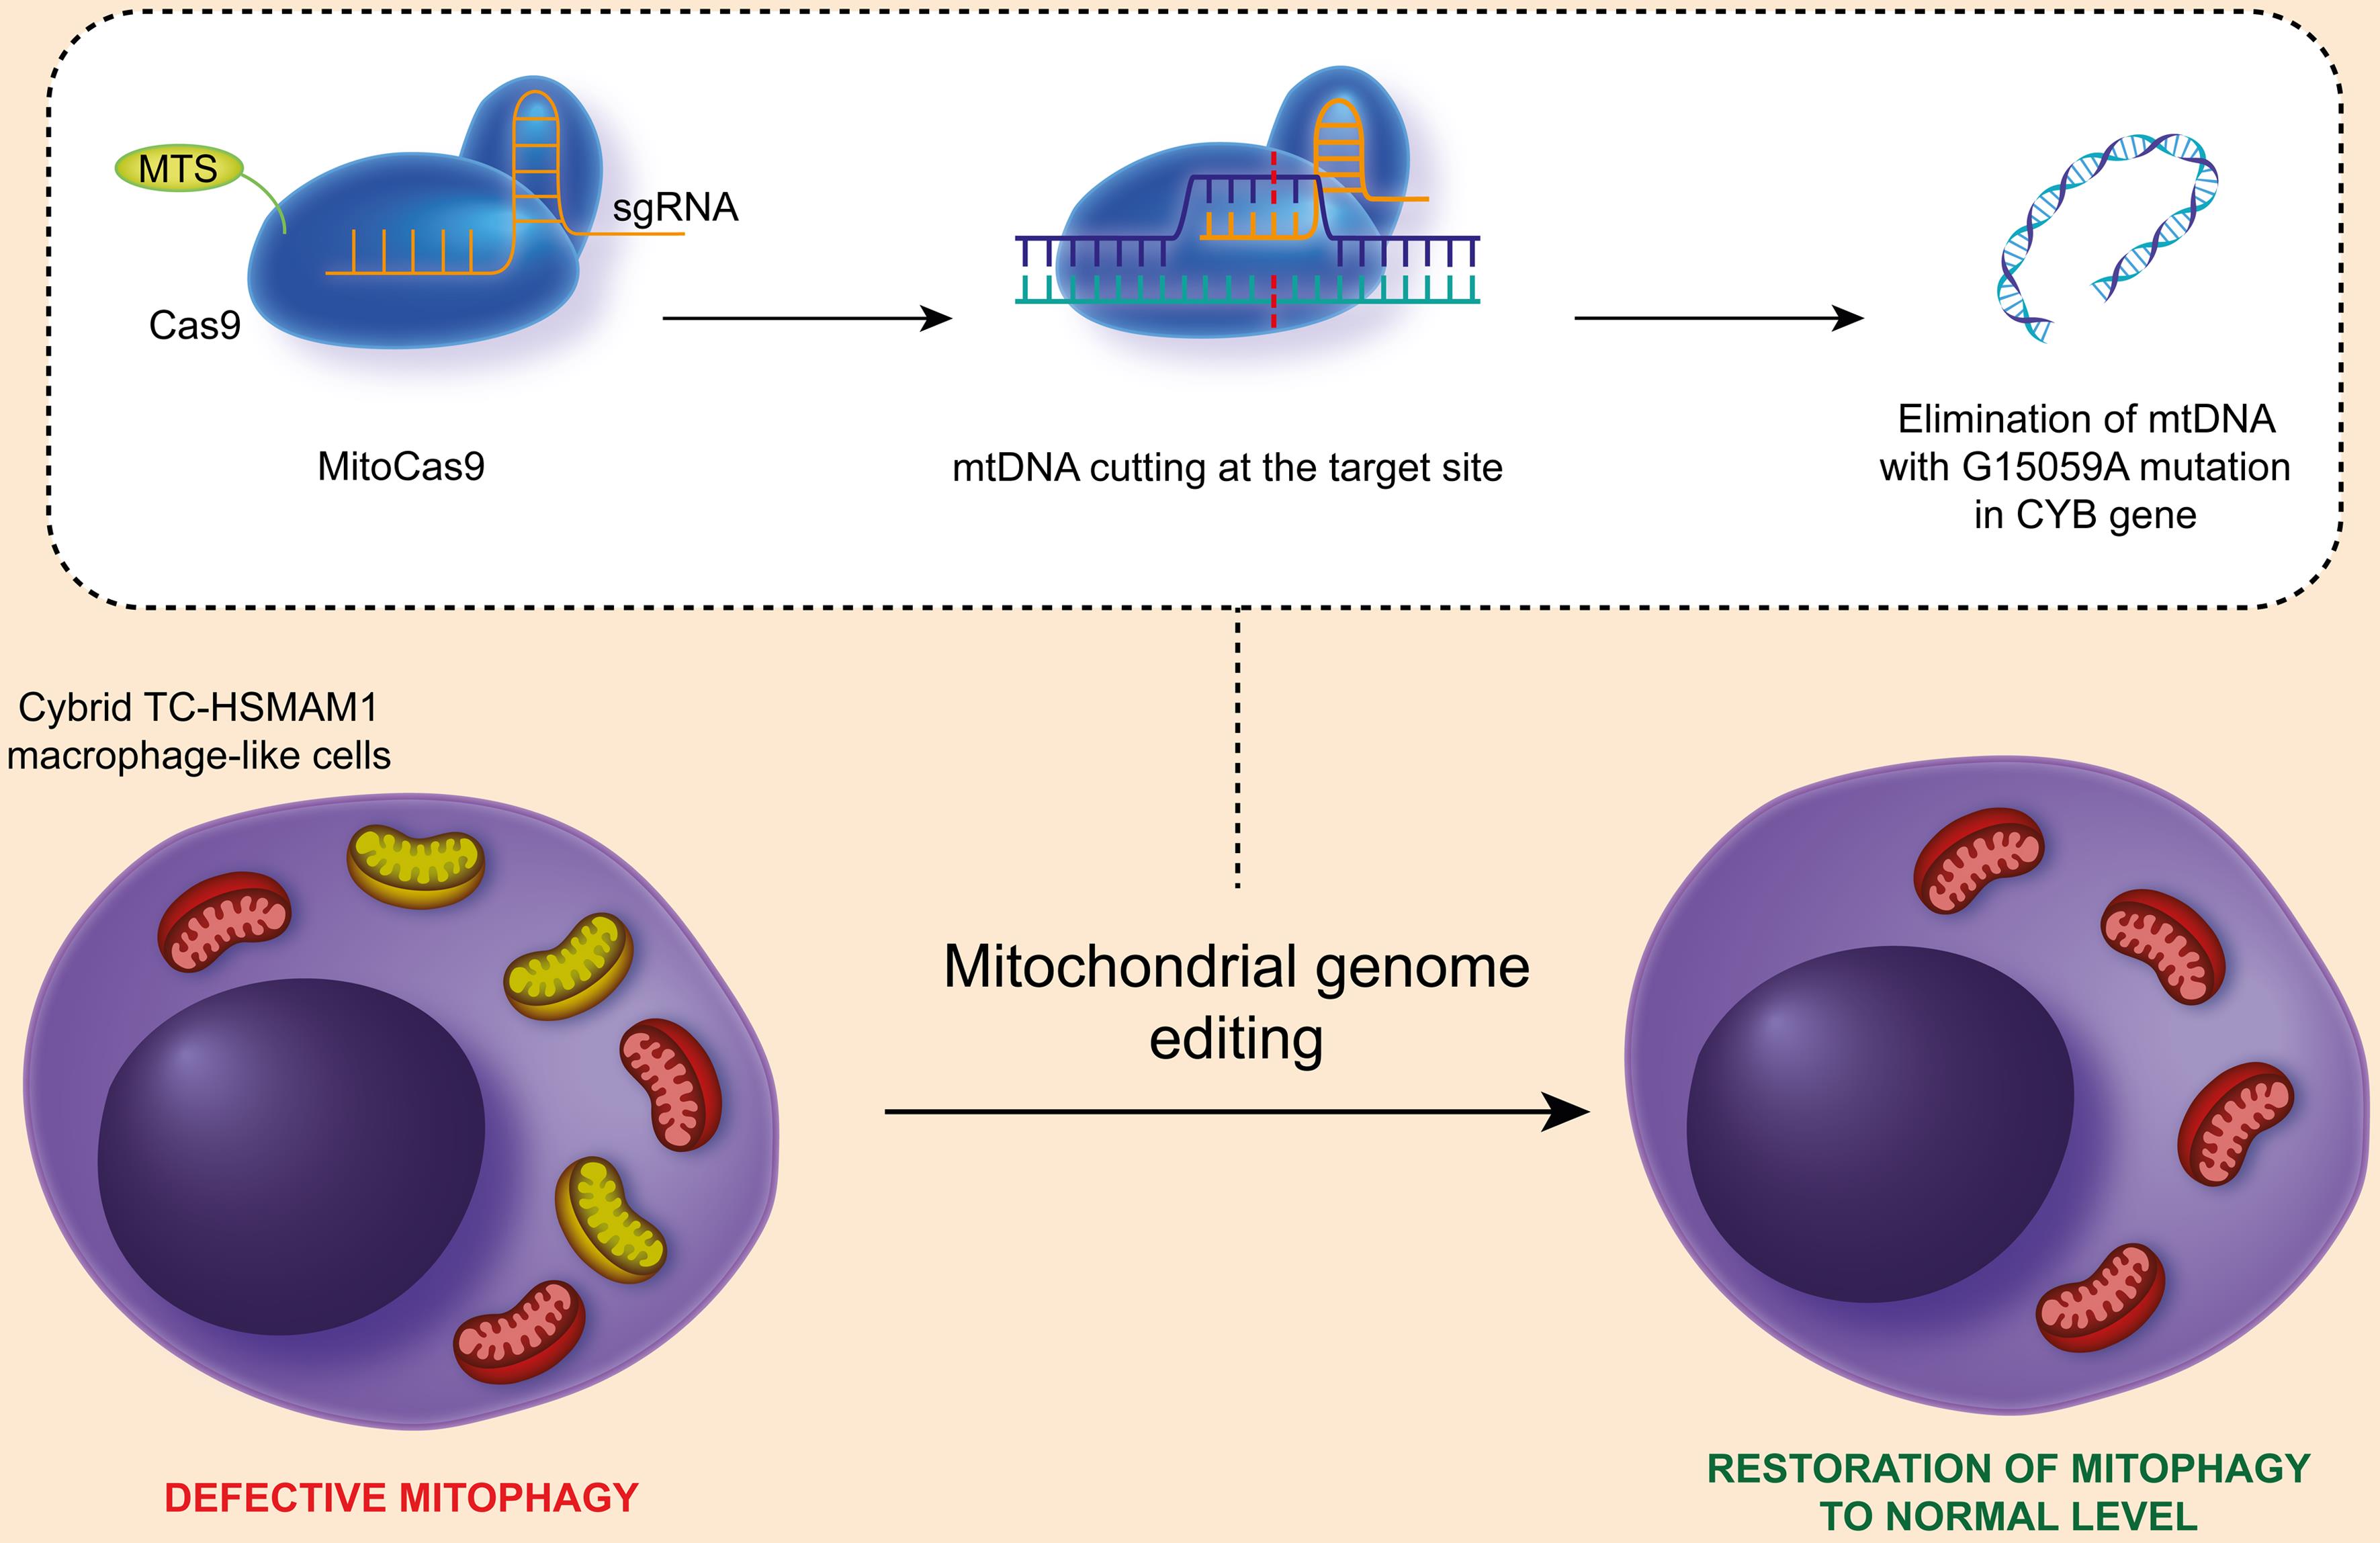 Schematic representation of functional recovery of defective mitophagy caused by the presence of the G15059A mutation in mtDNA in cybrid TC-HSMAM1 macrophage-like cells, elucidated by using the mitochondrial genome editing approach, the CRISPR/Cas9 technique.